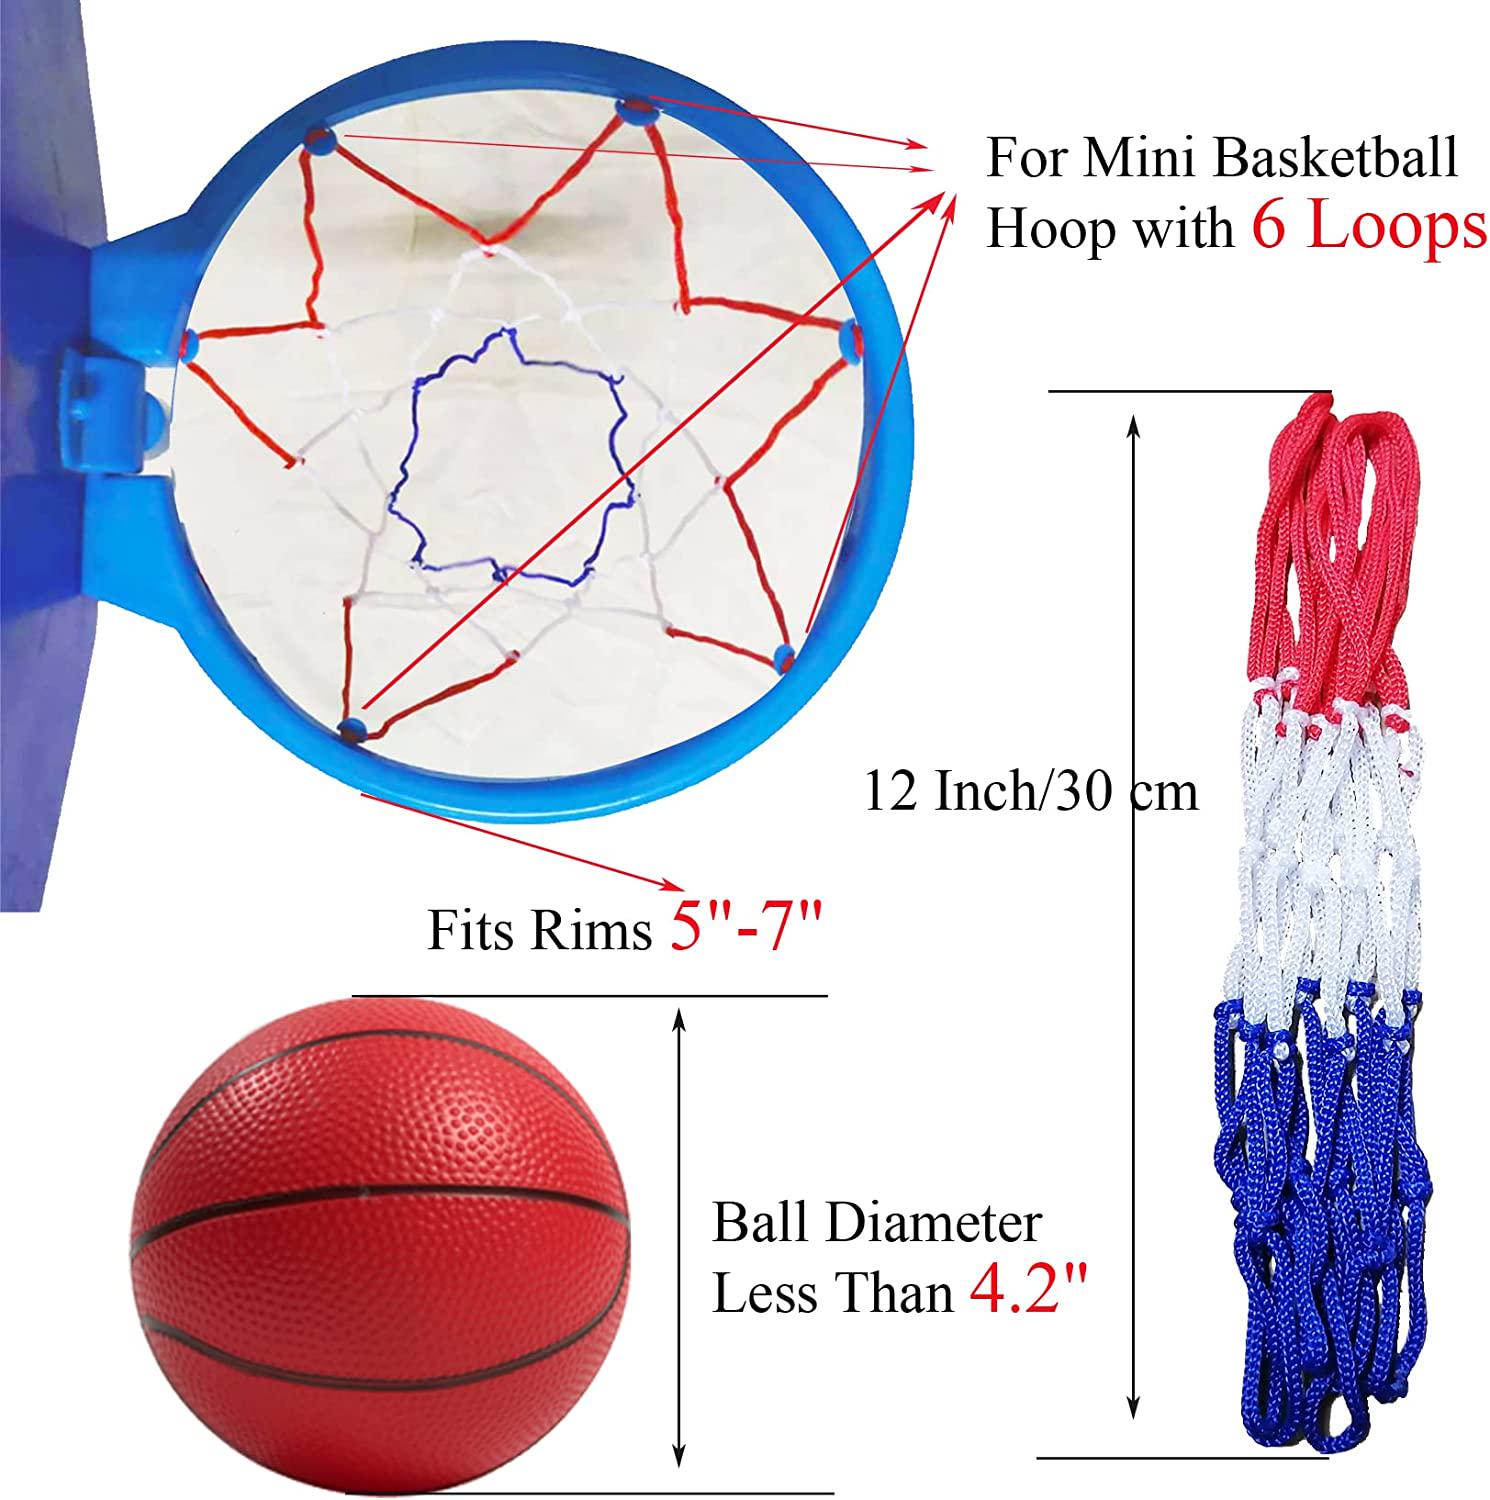 EDRLAITY, Small Replacement Net for Mini Basketball Hoop, Fits 6 Loops, 8 -10.25 Rims, All Weather Anti Whip